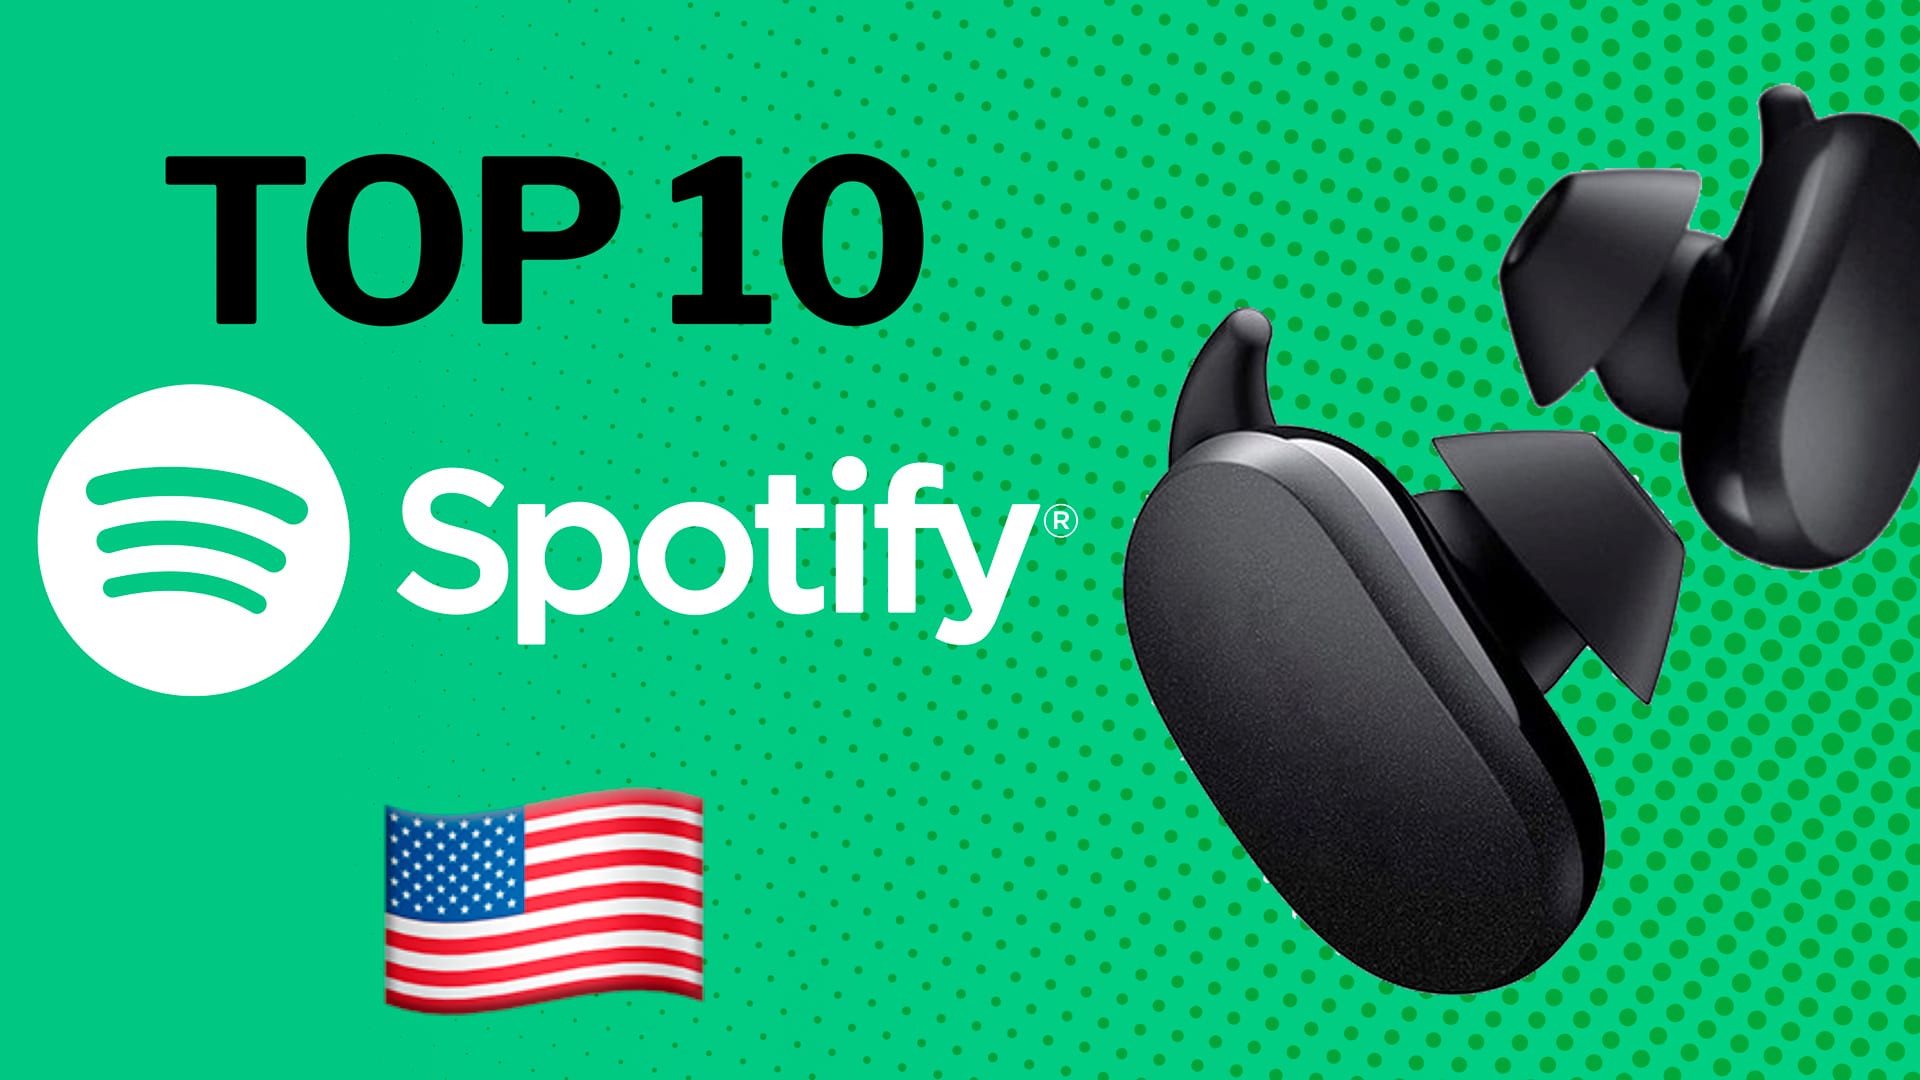 Spotify ranking: the 10 most listened songs in the United States